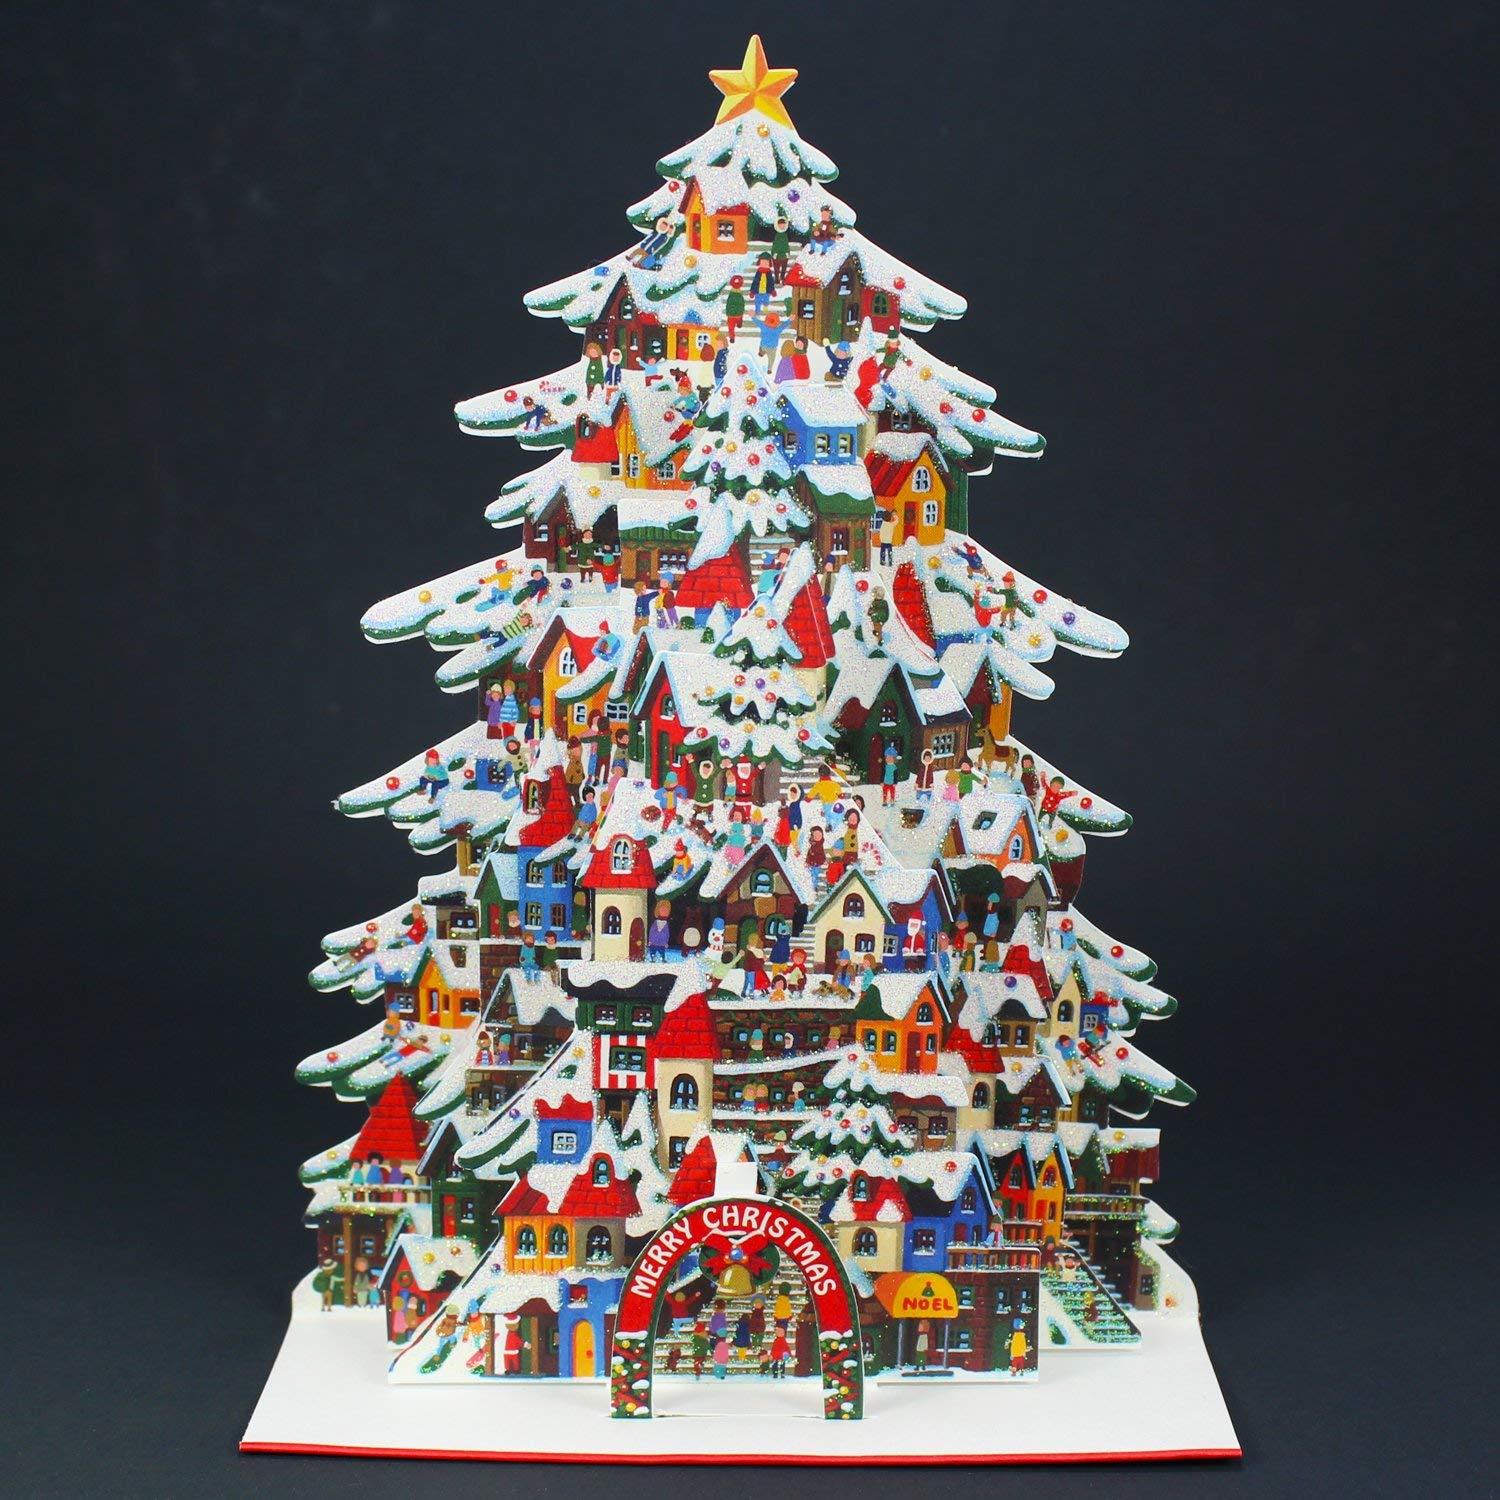 Shimmering Christmas Tree Village Pop Up Decorative Greeting Card / Christmas Card 